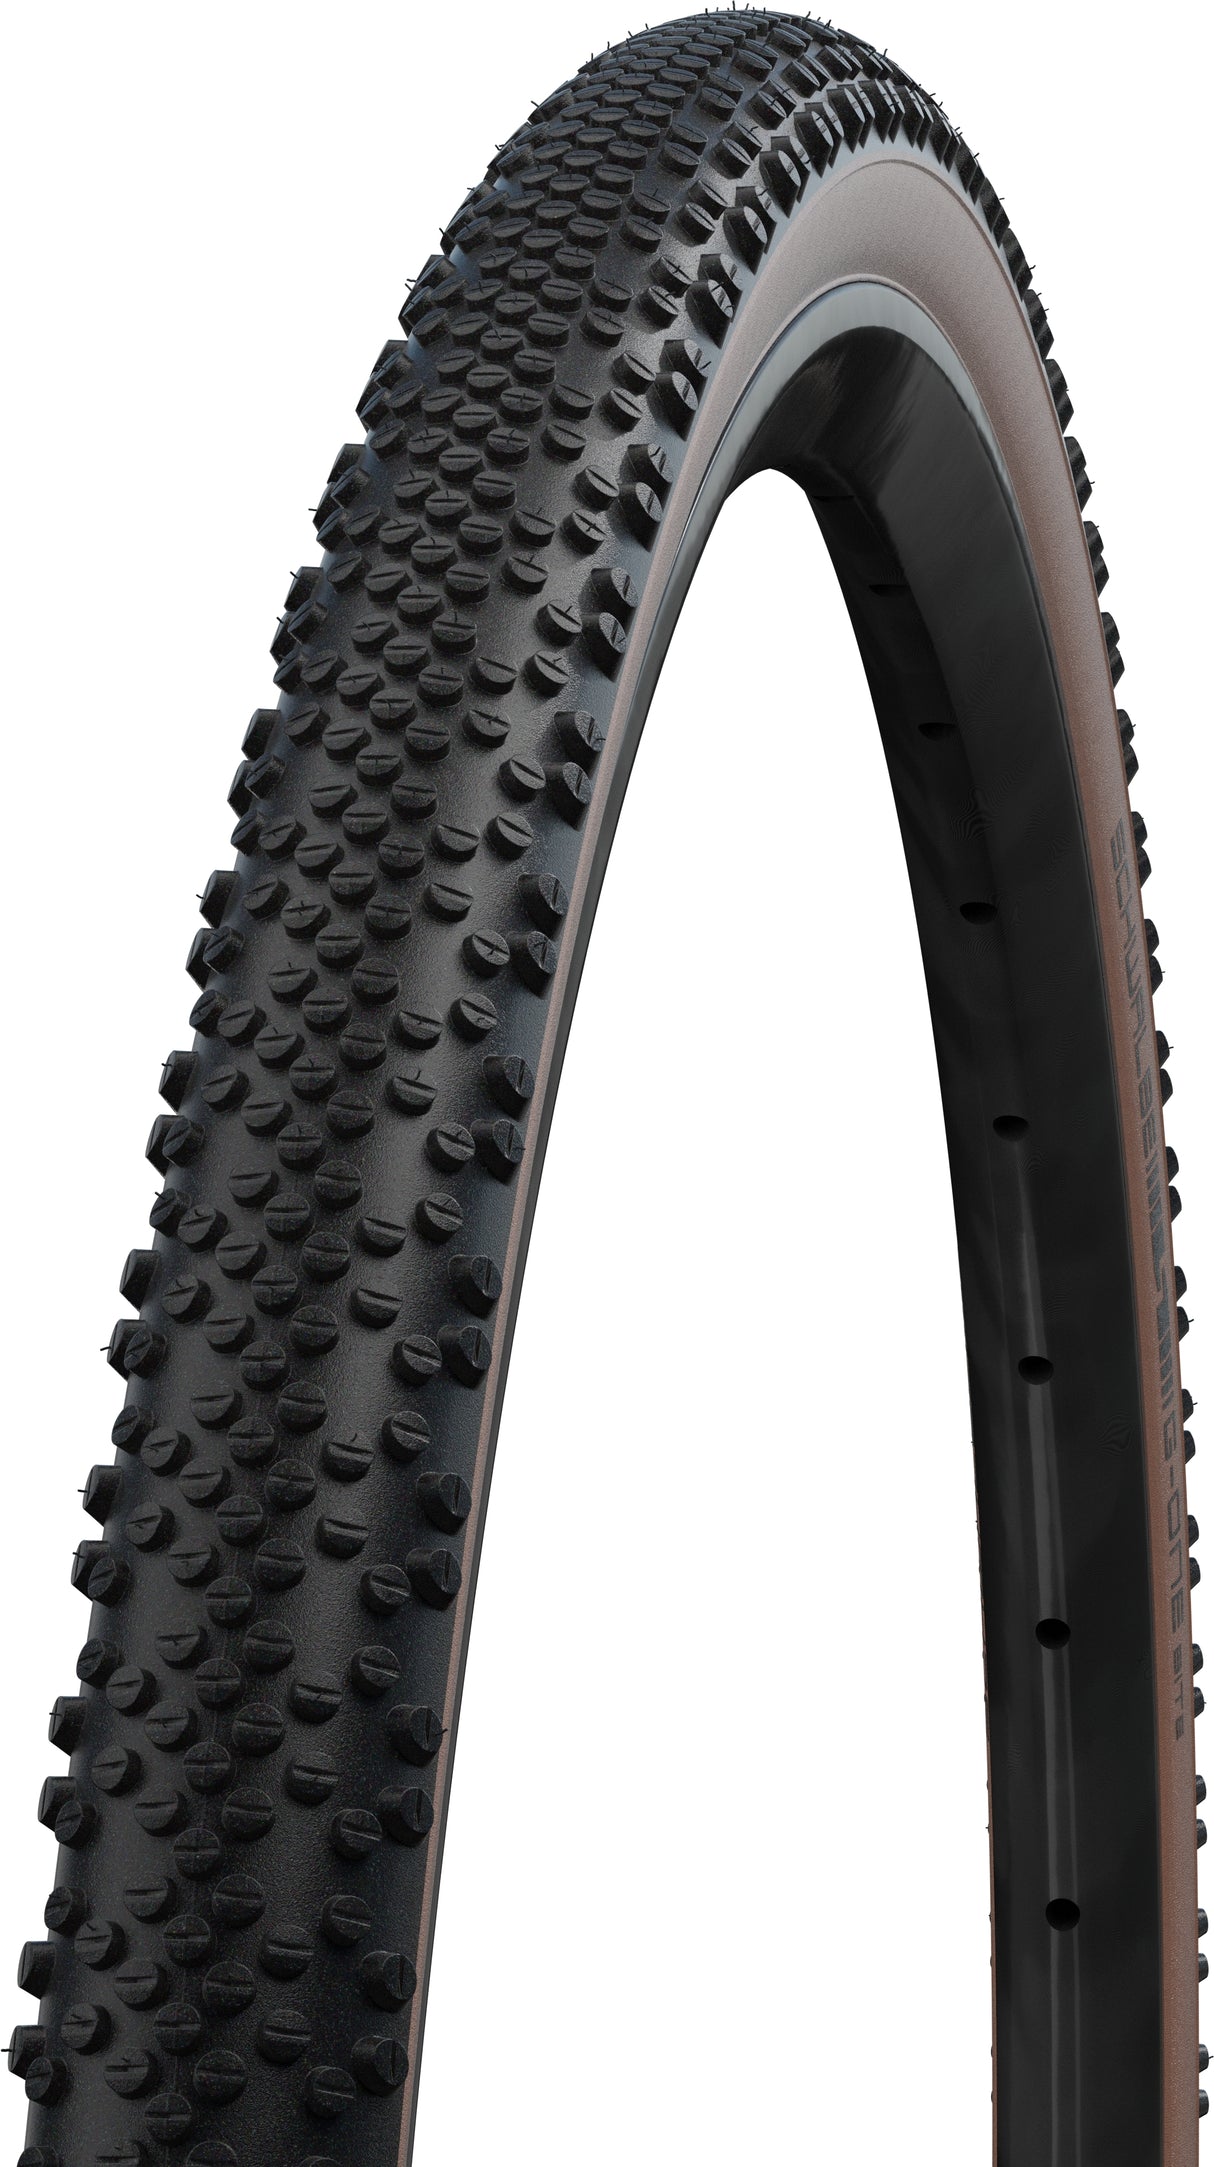 SCHWALBE G-One Bite vouwband 700x40C Performance RaceGuard TLE